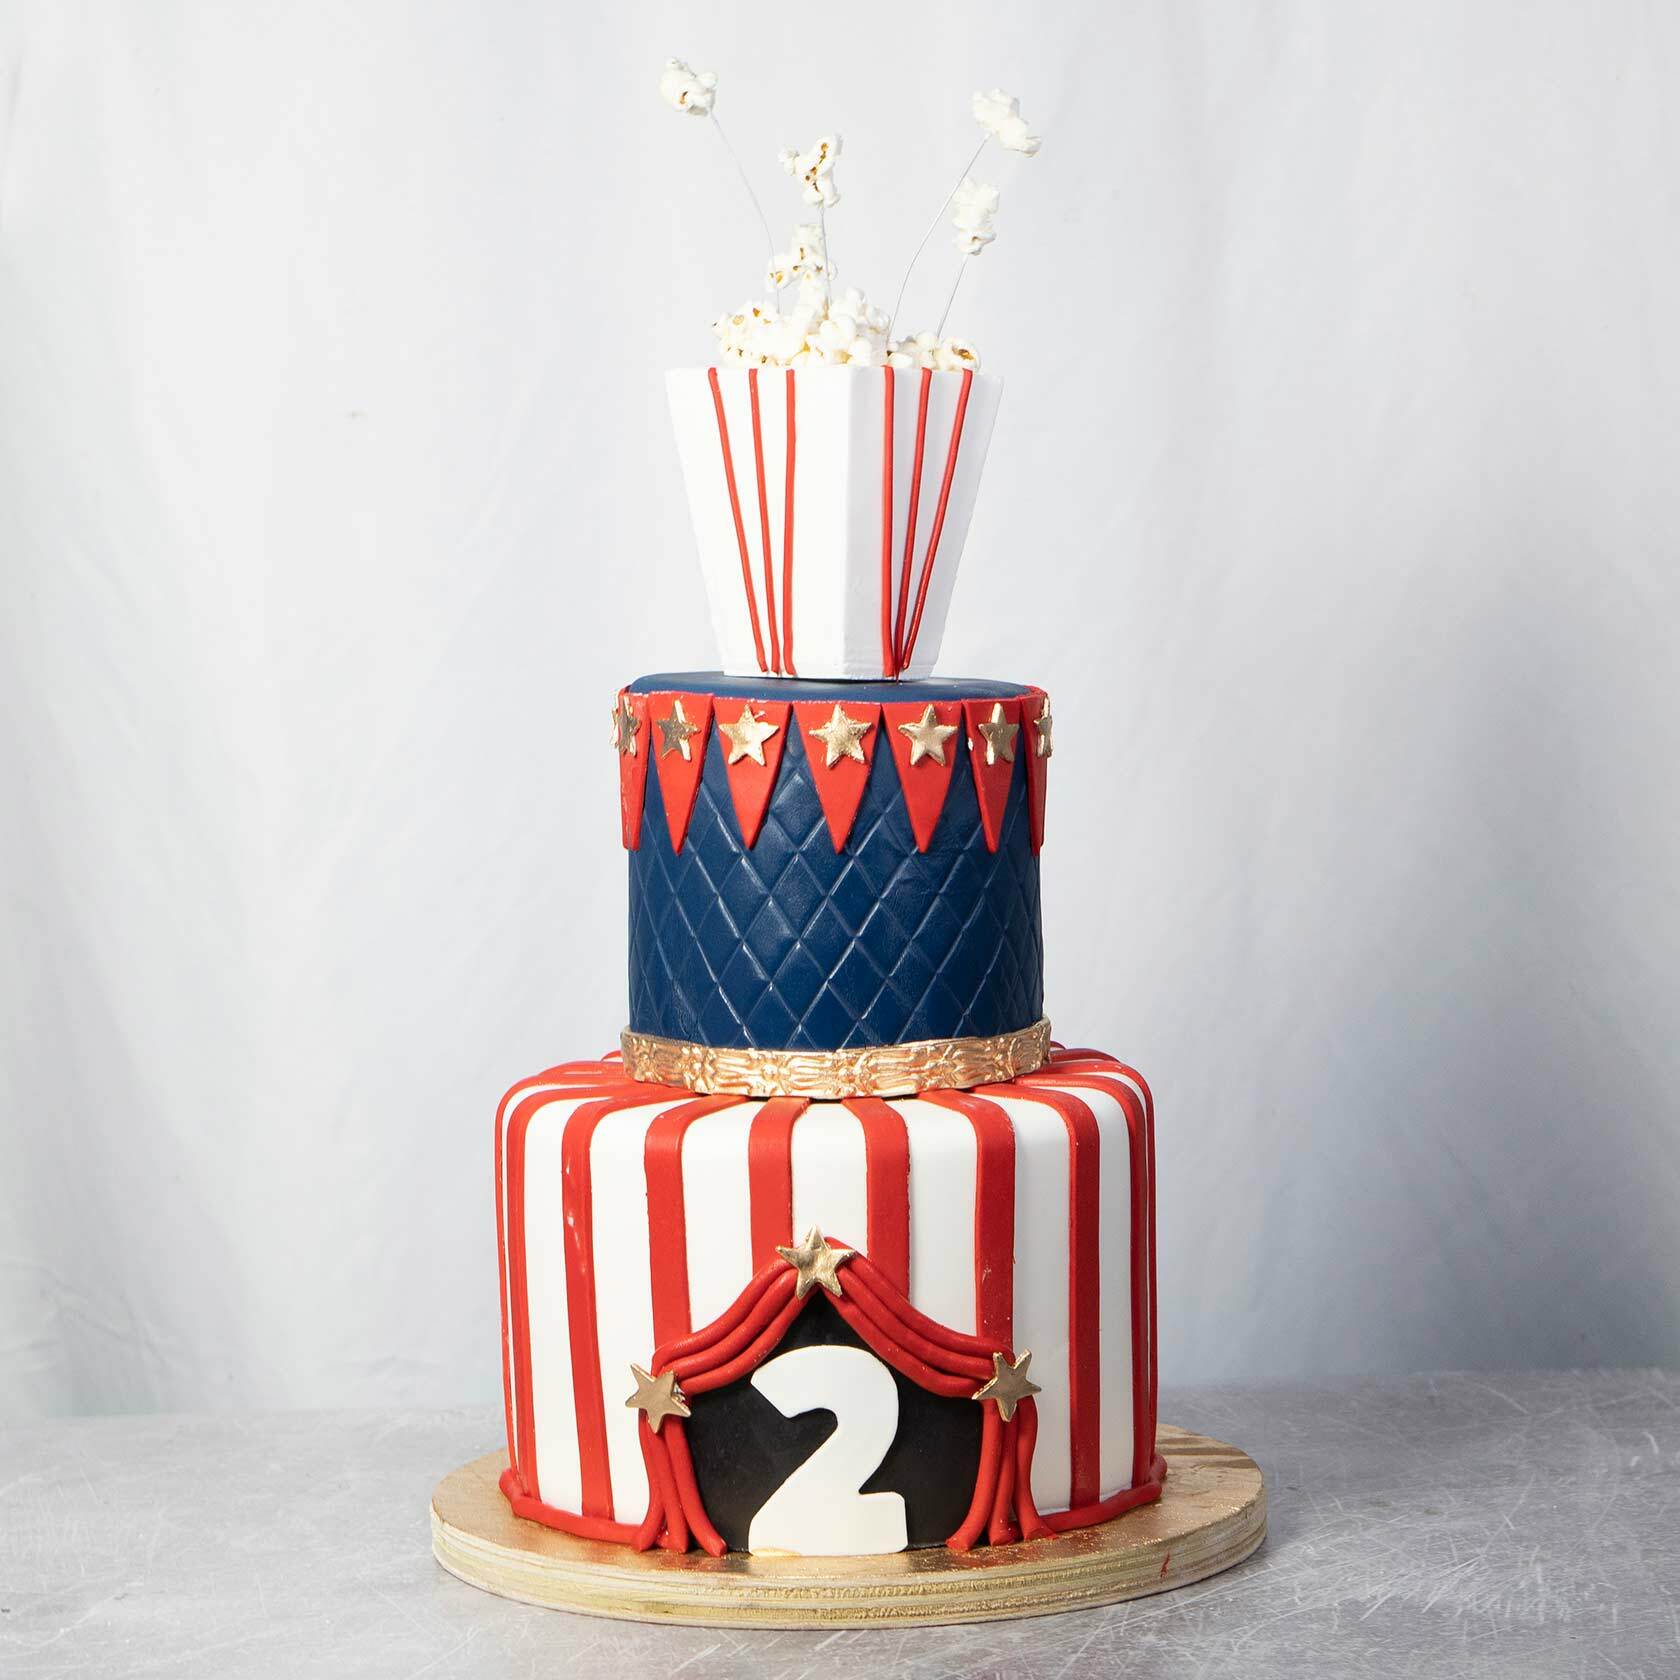 Sugar Cake Company - A cute 3 tier Circus cake with a girly feel for a  first birthday today 😊 Inside flavor for all 3 tiers was Peanut Butter  Cup, finished with fondant. | Facebook